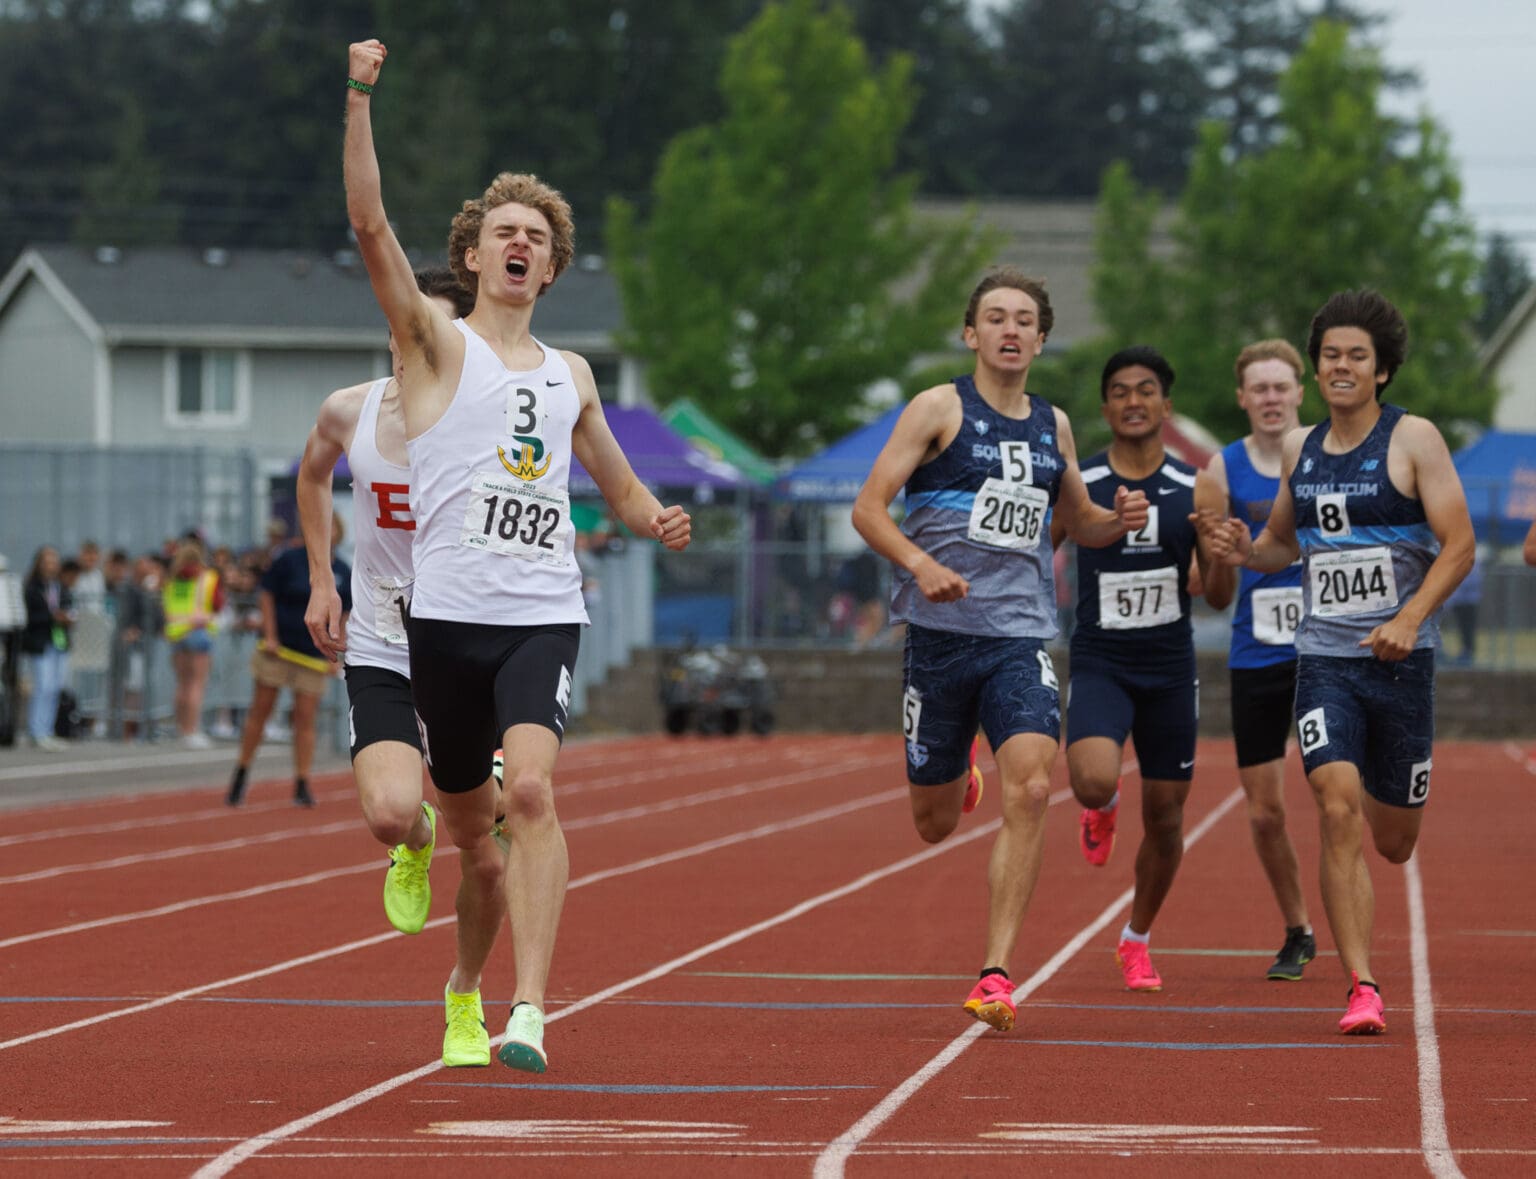 Sehome's Zack Munson raises a fist in the air as he crosses the finish line May 27 to win the 2A boys 800-meter run